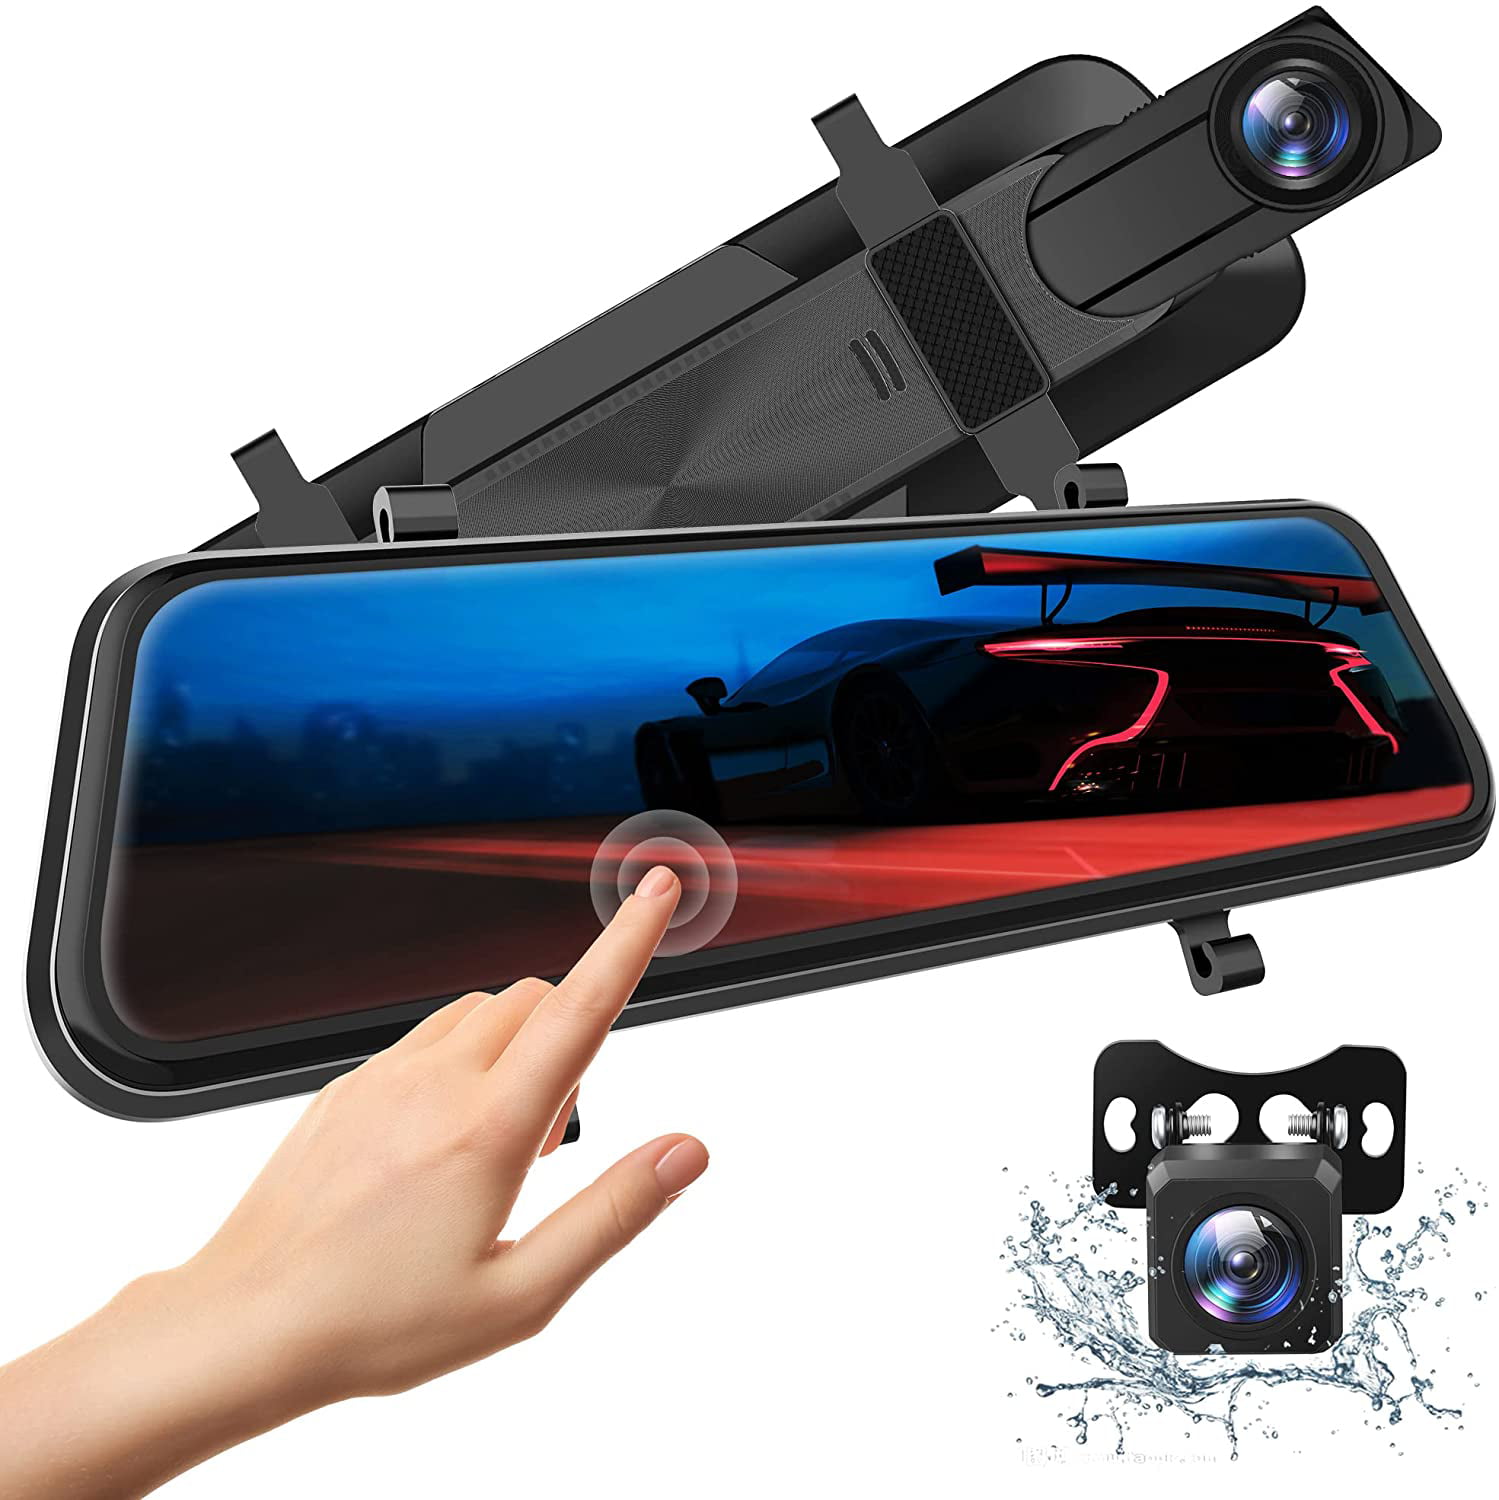 IPS Full Touch Screen Waterproof Backup Rear View Camera Parking Monitor for Cars Night Vision GPS Tracking Loop Recording 12 2.5K Mirror Dash Cam w/ Voice Control 